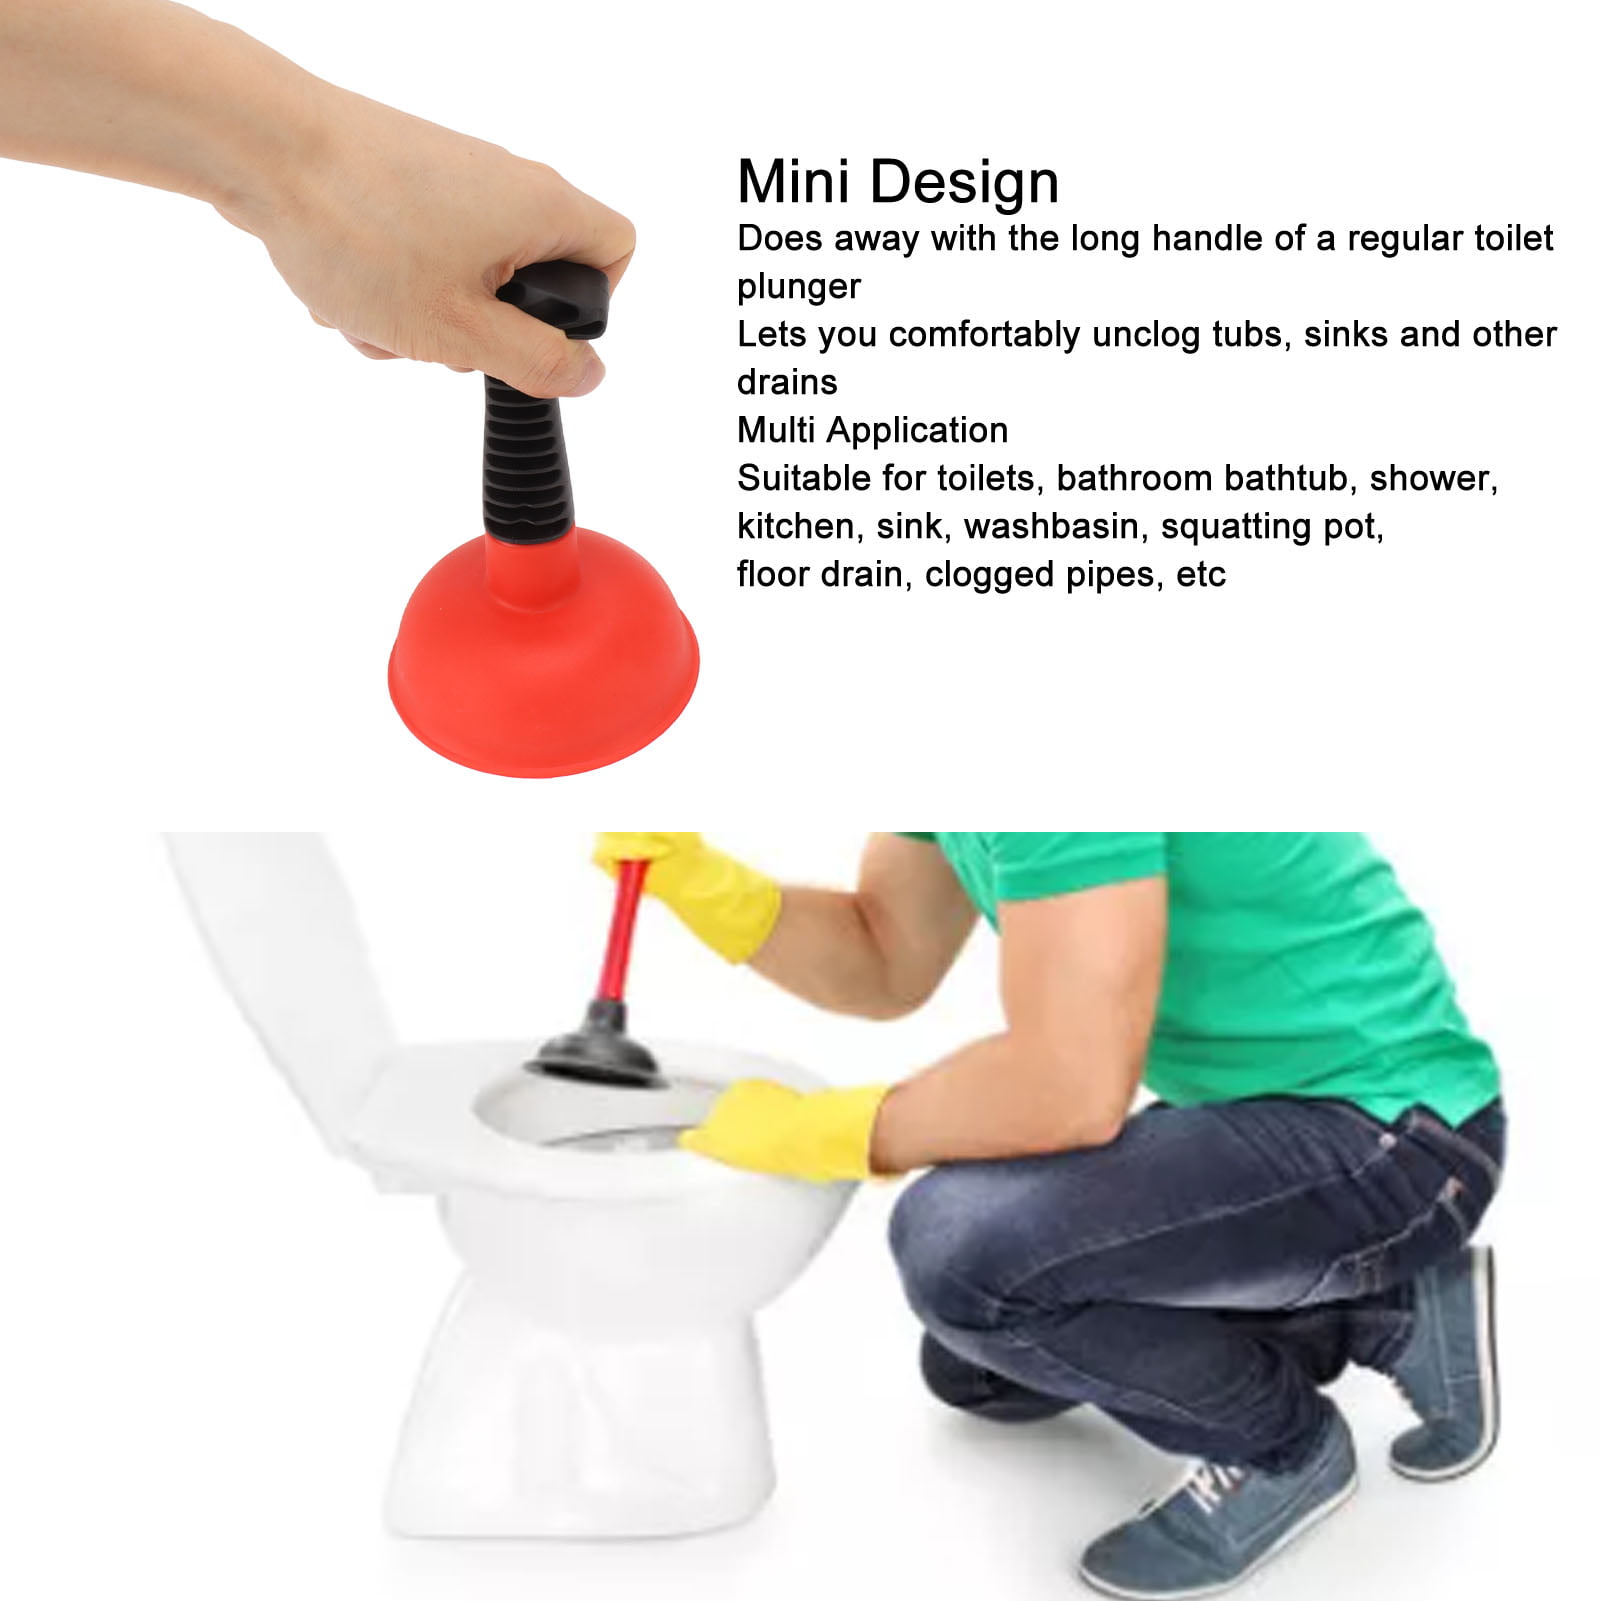 How to Use a Plunger: Instructions for Use in Sinks, Toilets and Tubs